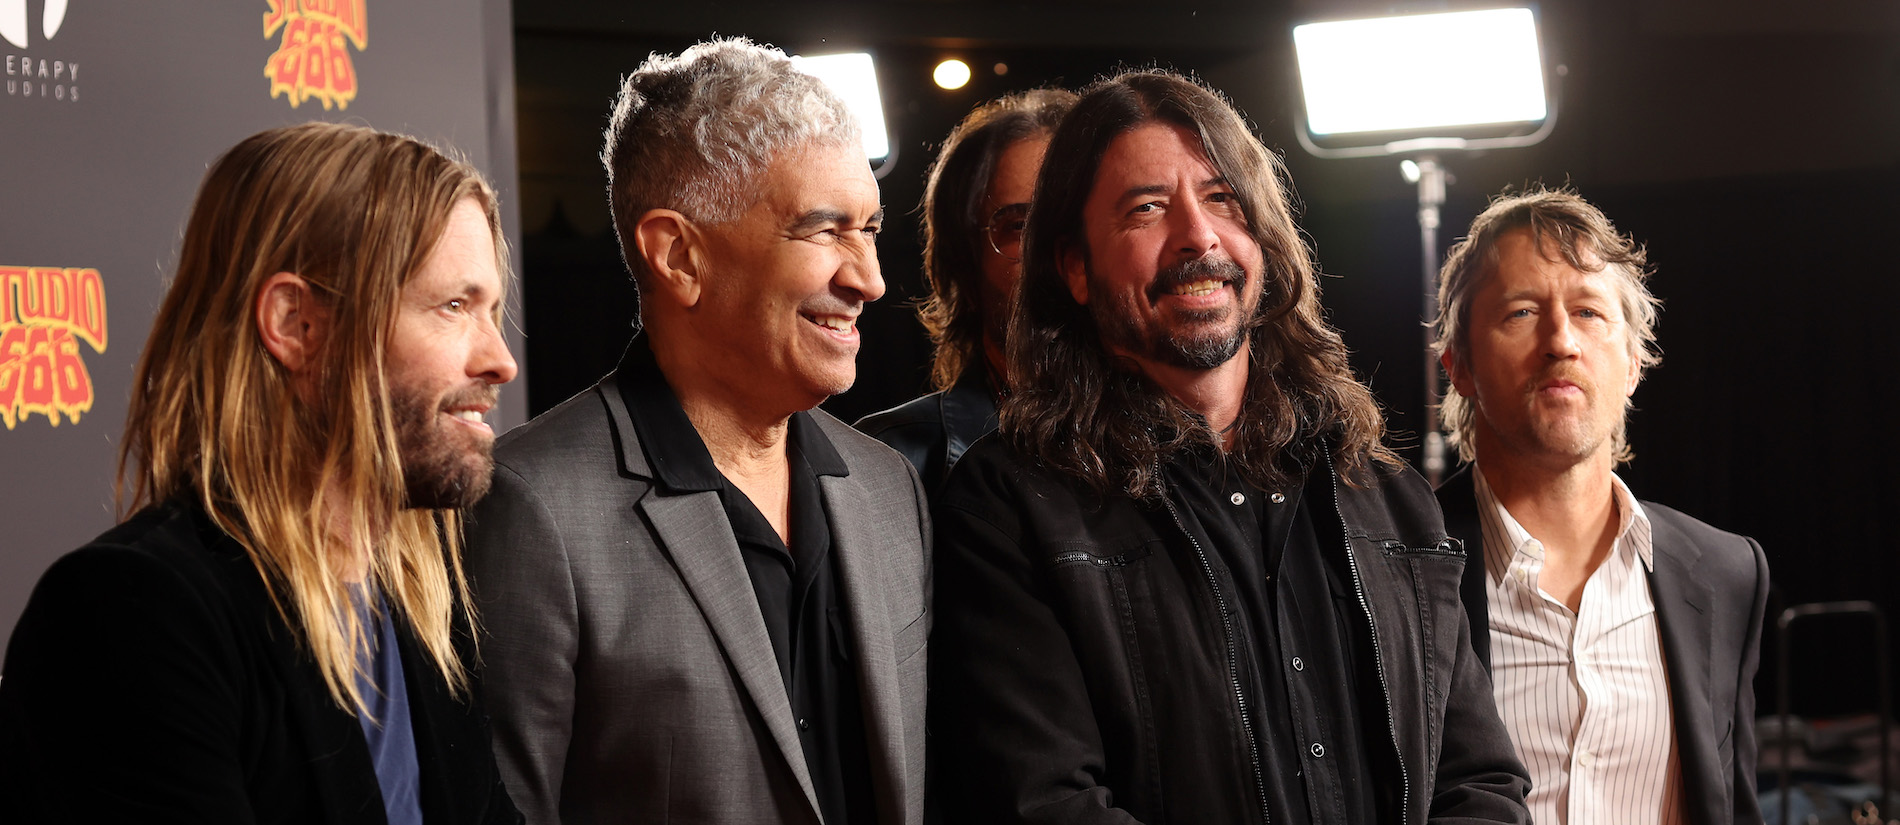 Foo Fighters Will Make Another Album, A Band Member Suggests